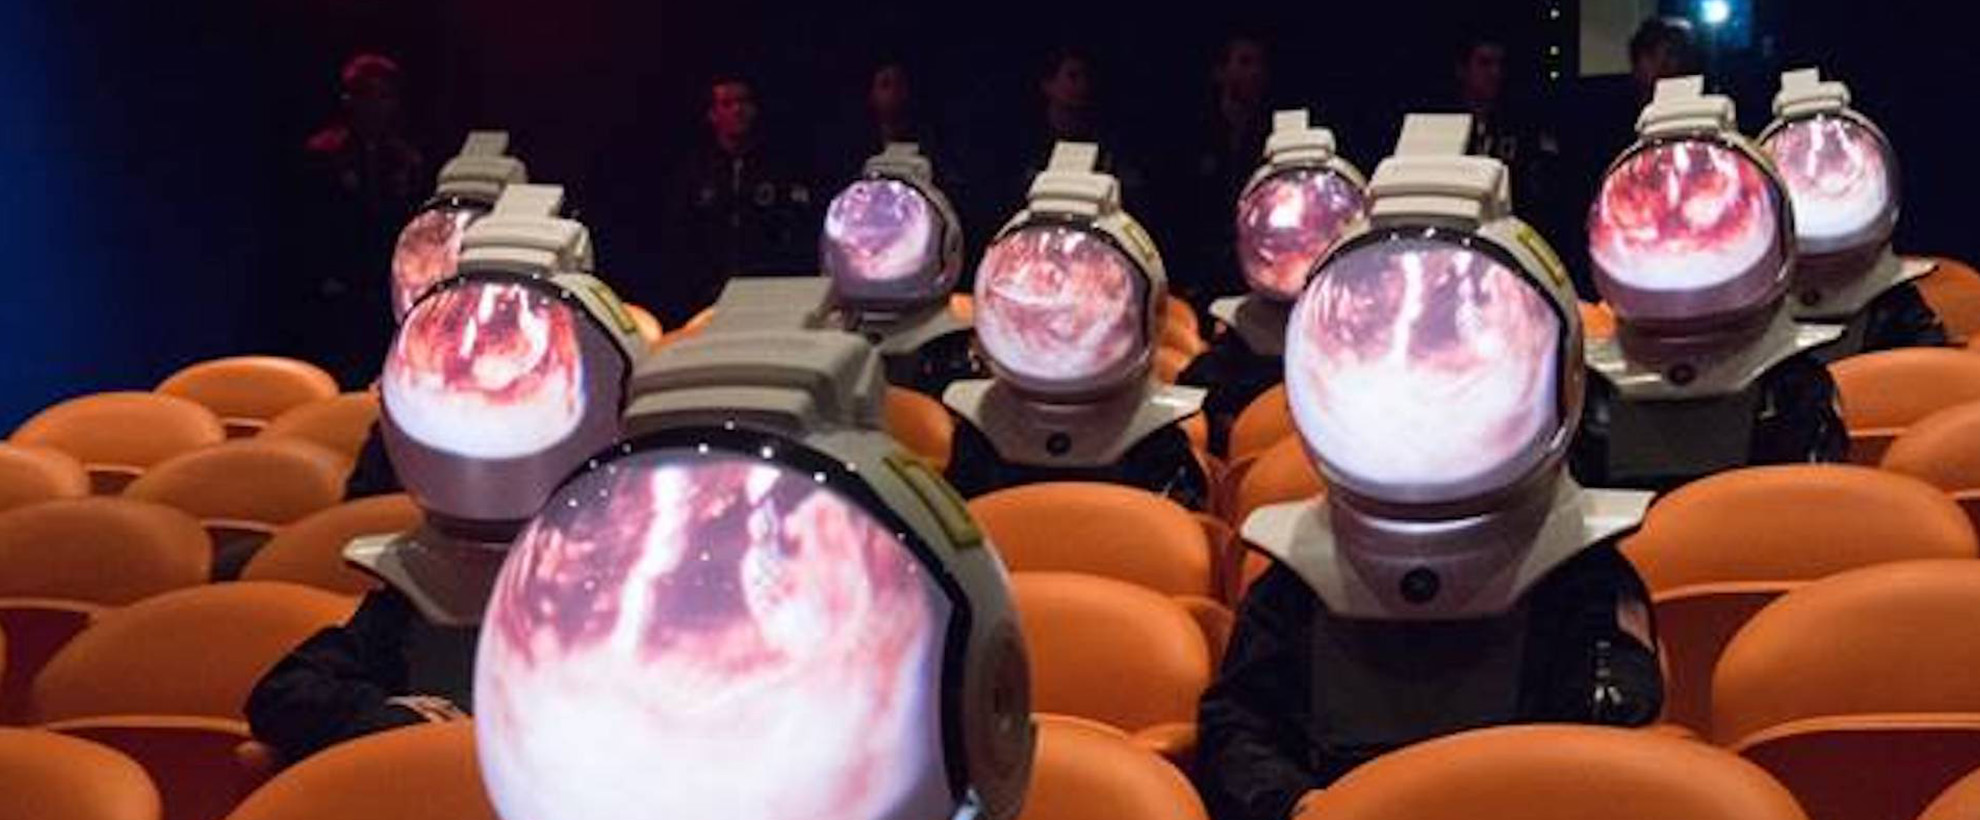 A group of people in space suits sit in orange chairs. In the reflection of their space helmets is a planet